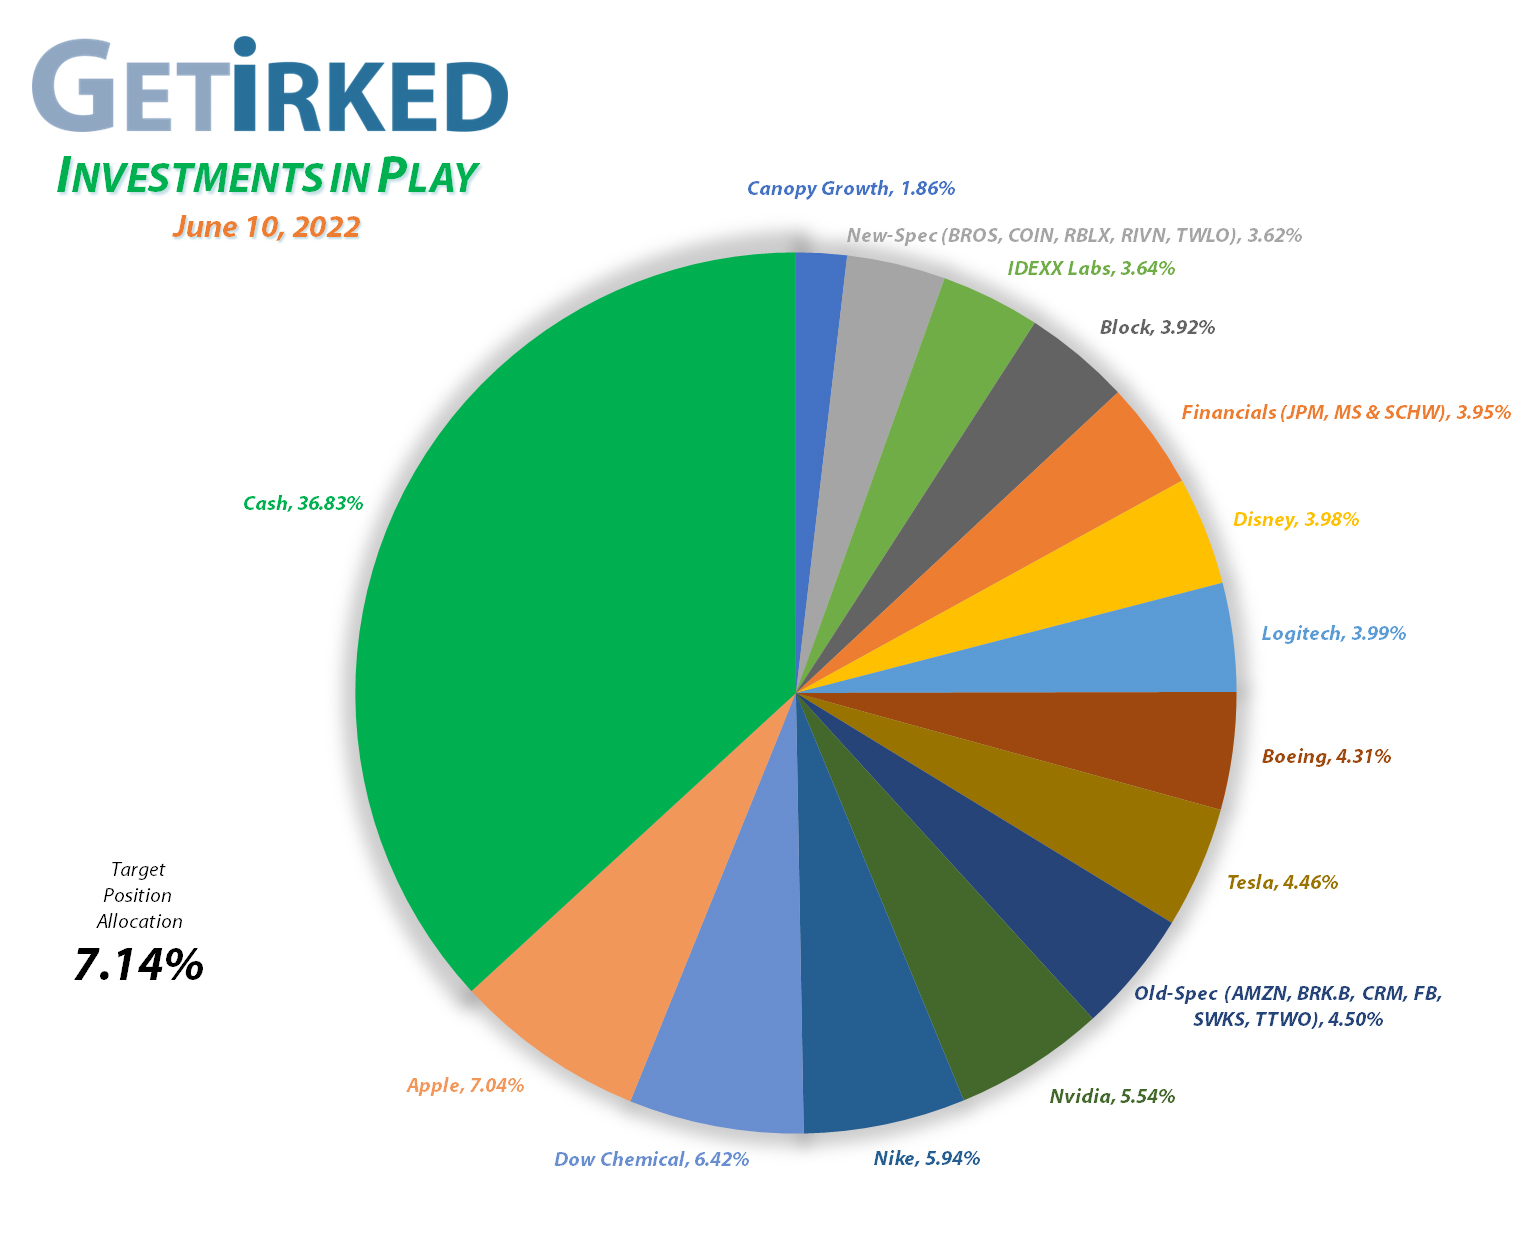 Get Irked - Investments in Play - Current Holdings - March 12, 2021et Irked's Pandemic Portfolio Holdings as of June 10, 2022